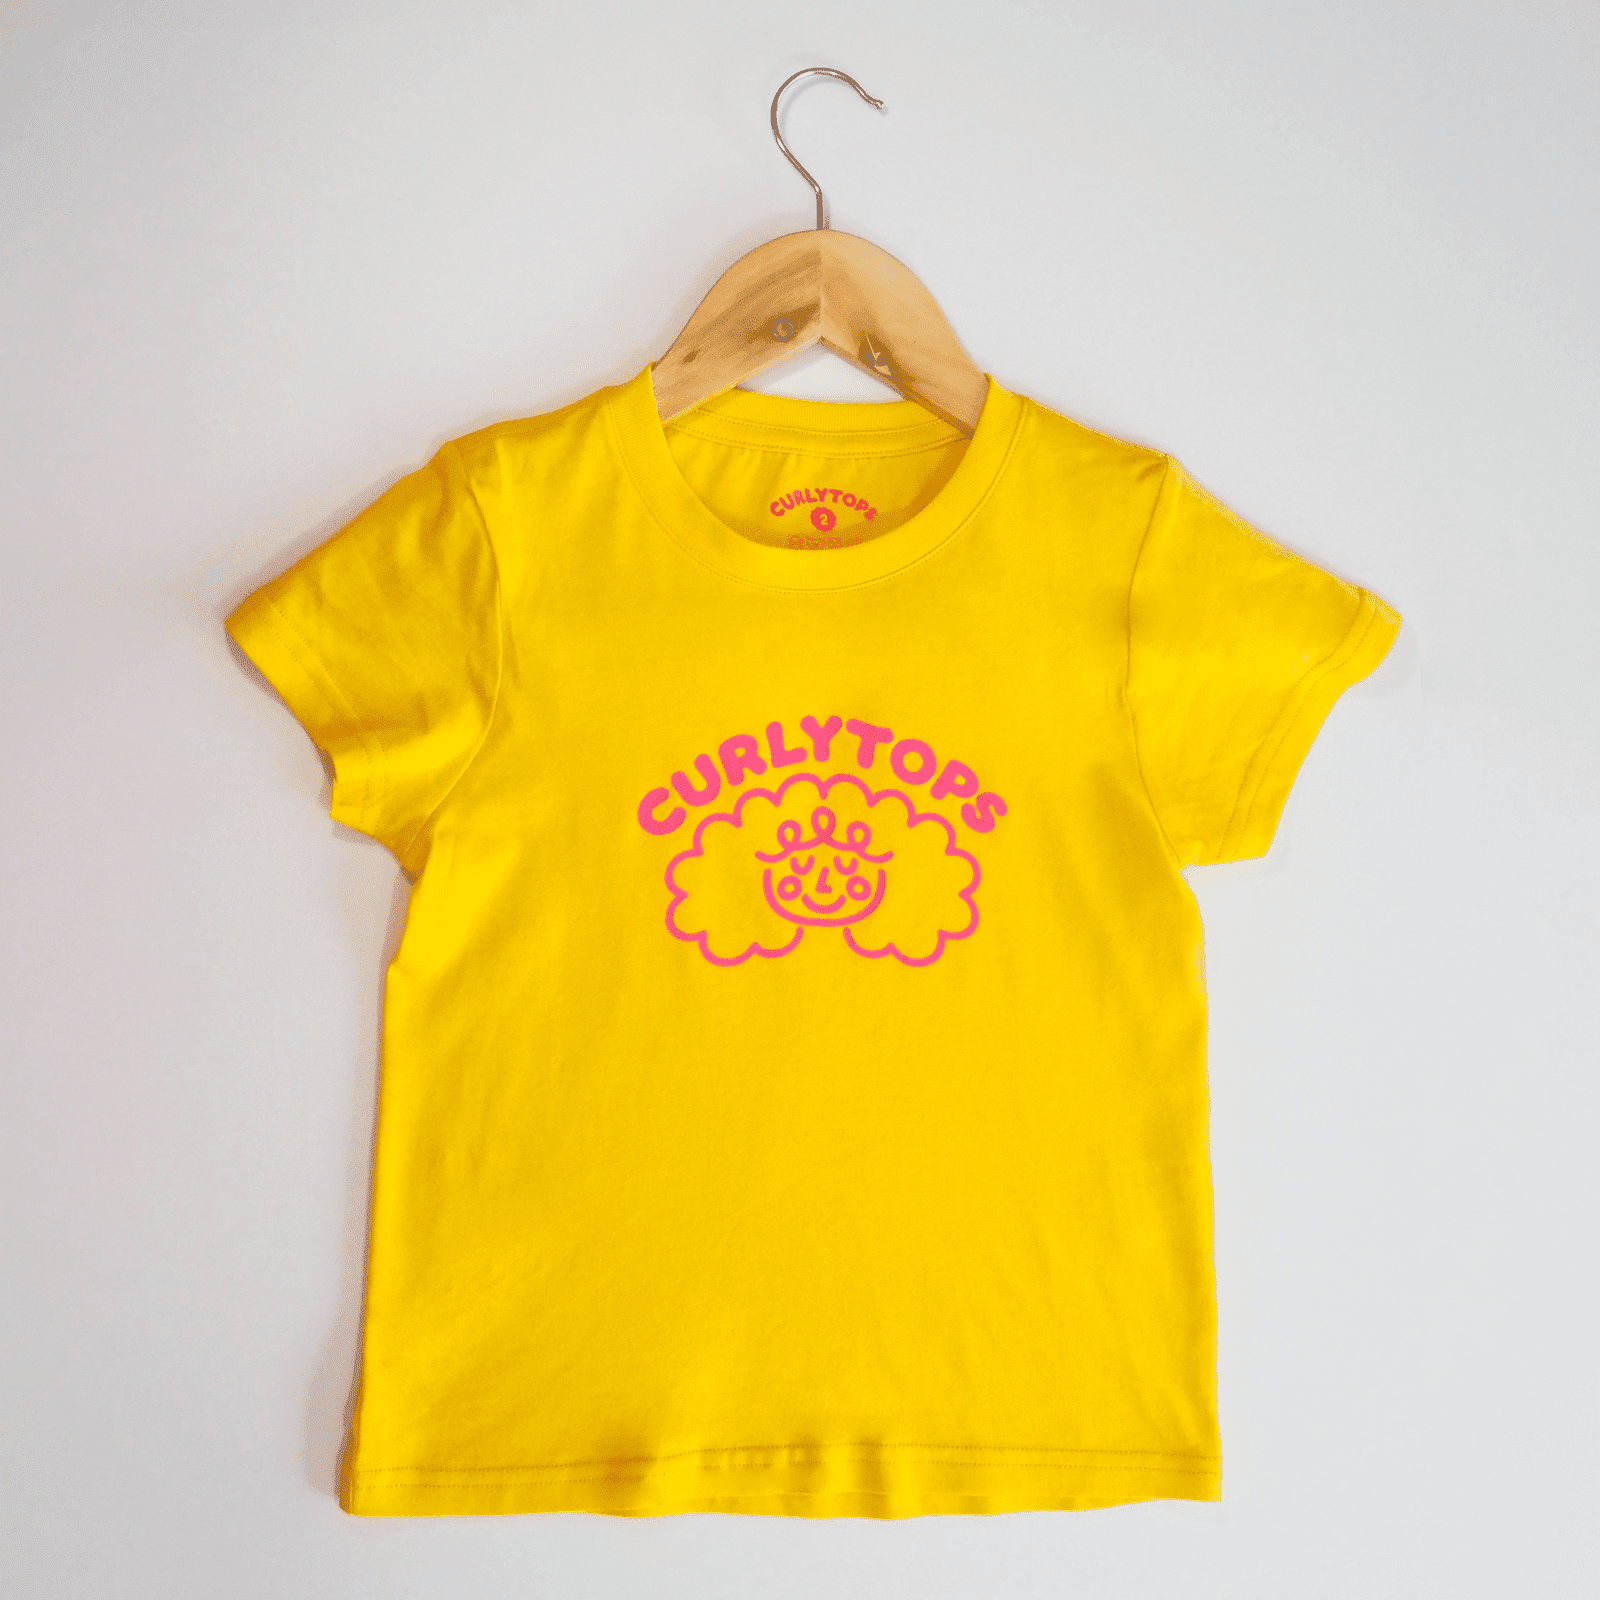 Curlytops Yellow T-shirt for people with Curly Hair